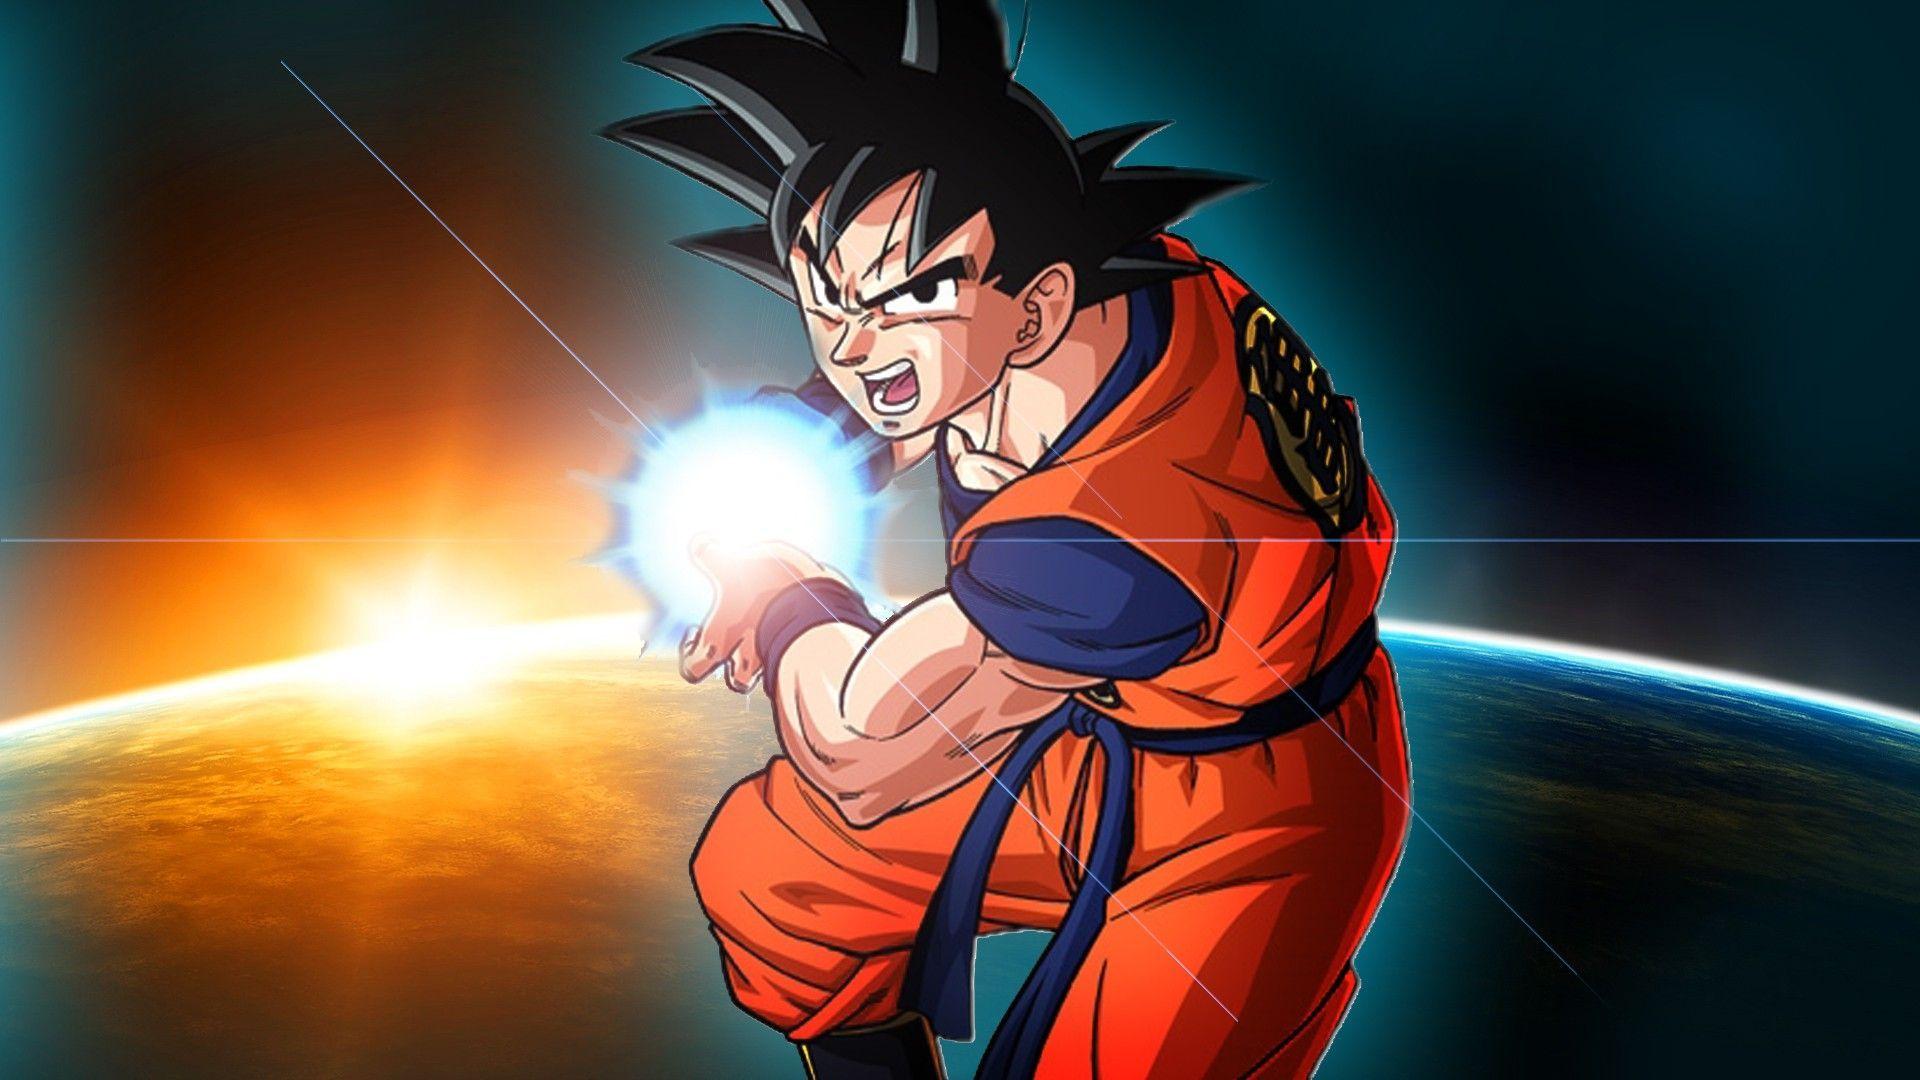 21-facts-about-goku-dragon-ball-z